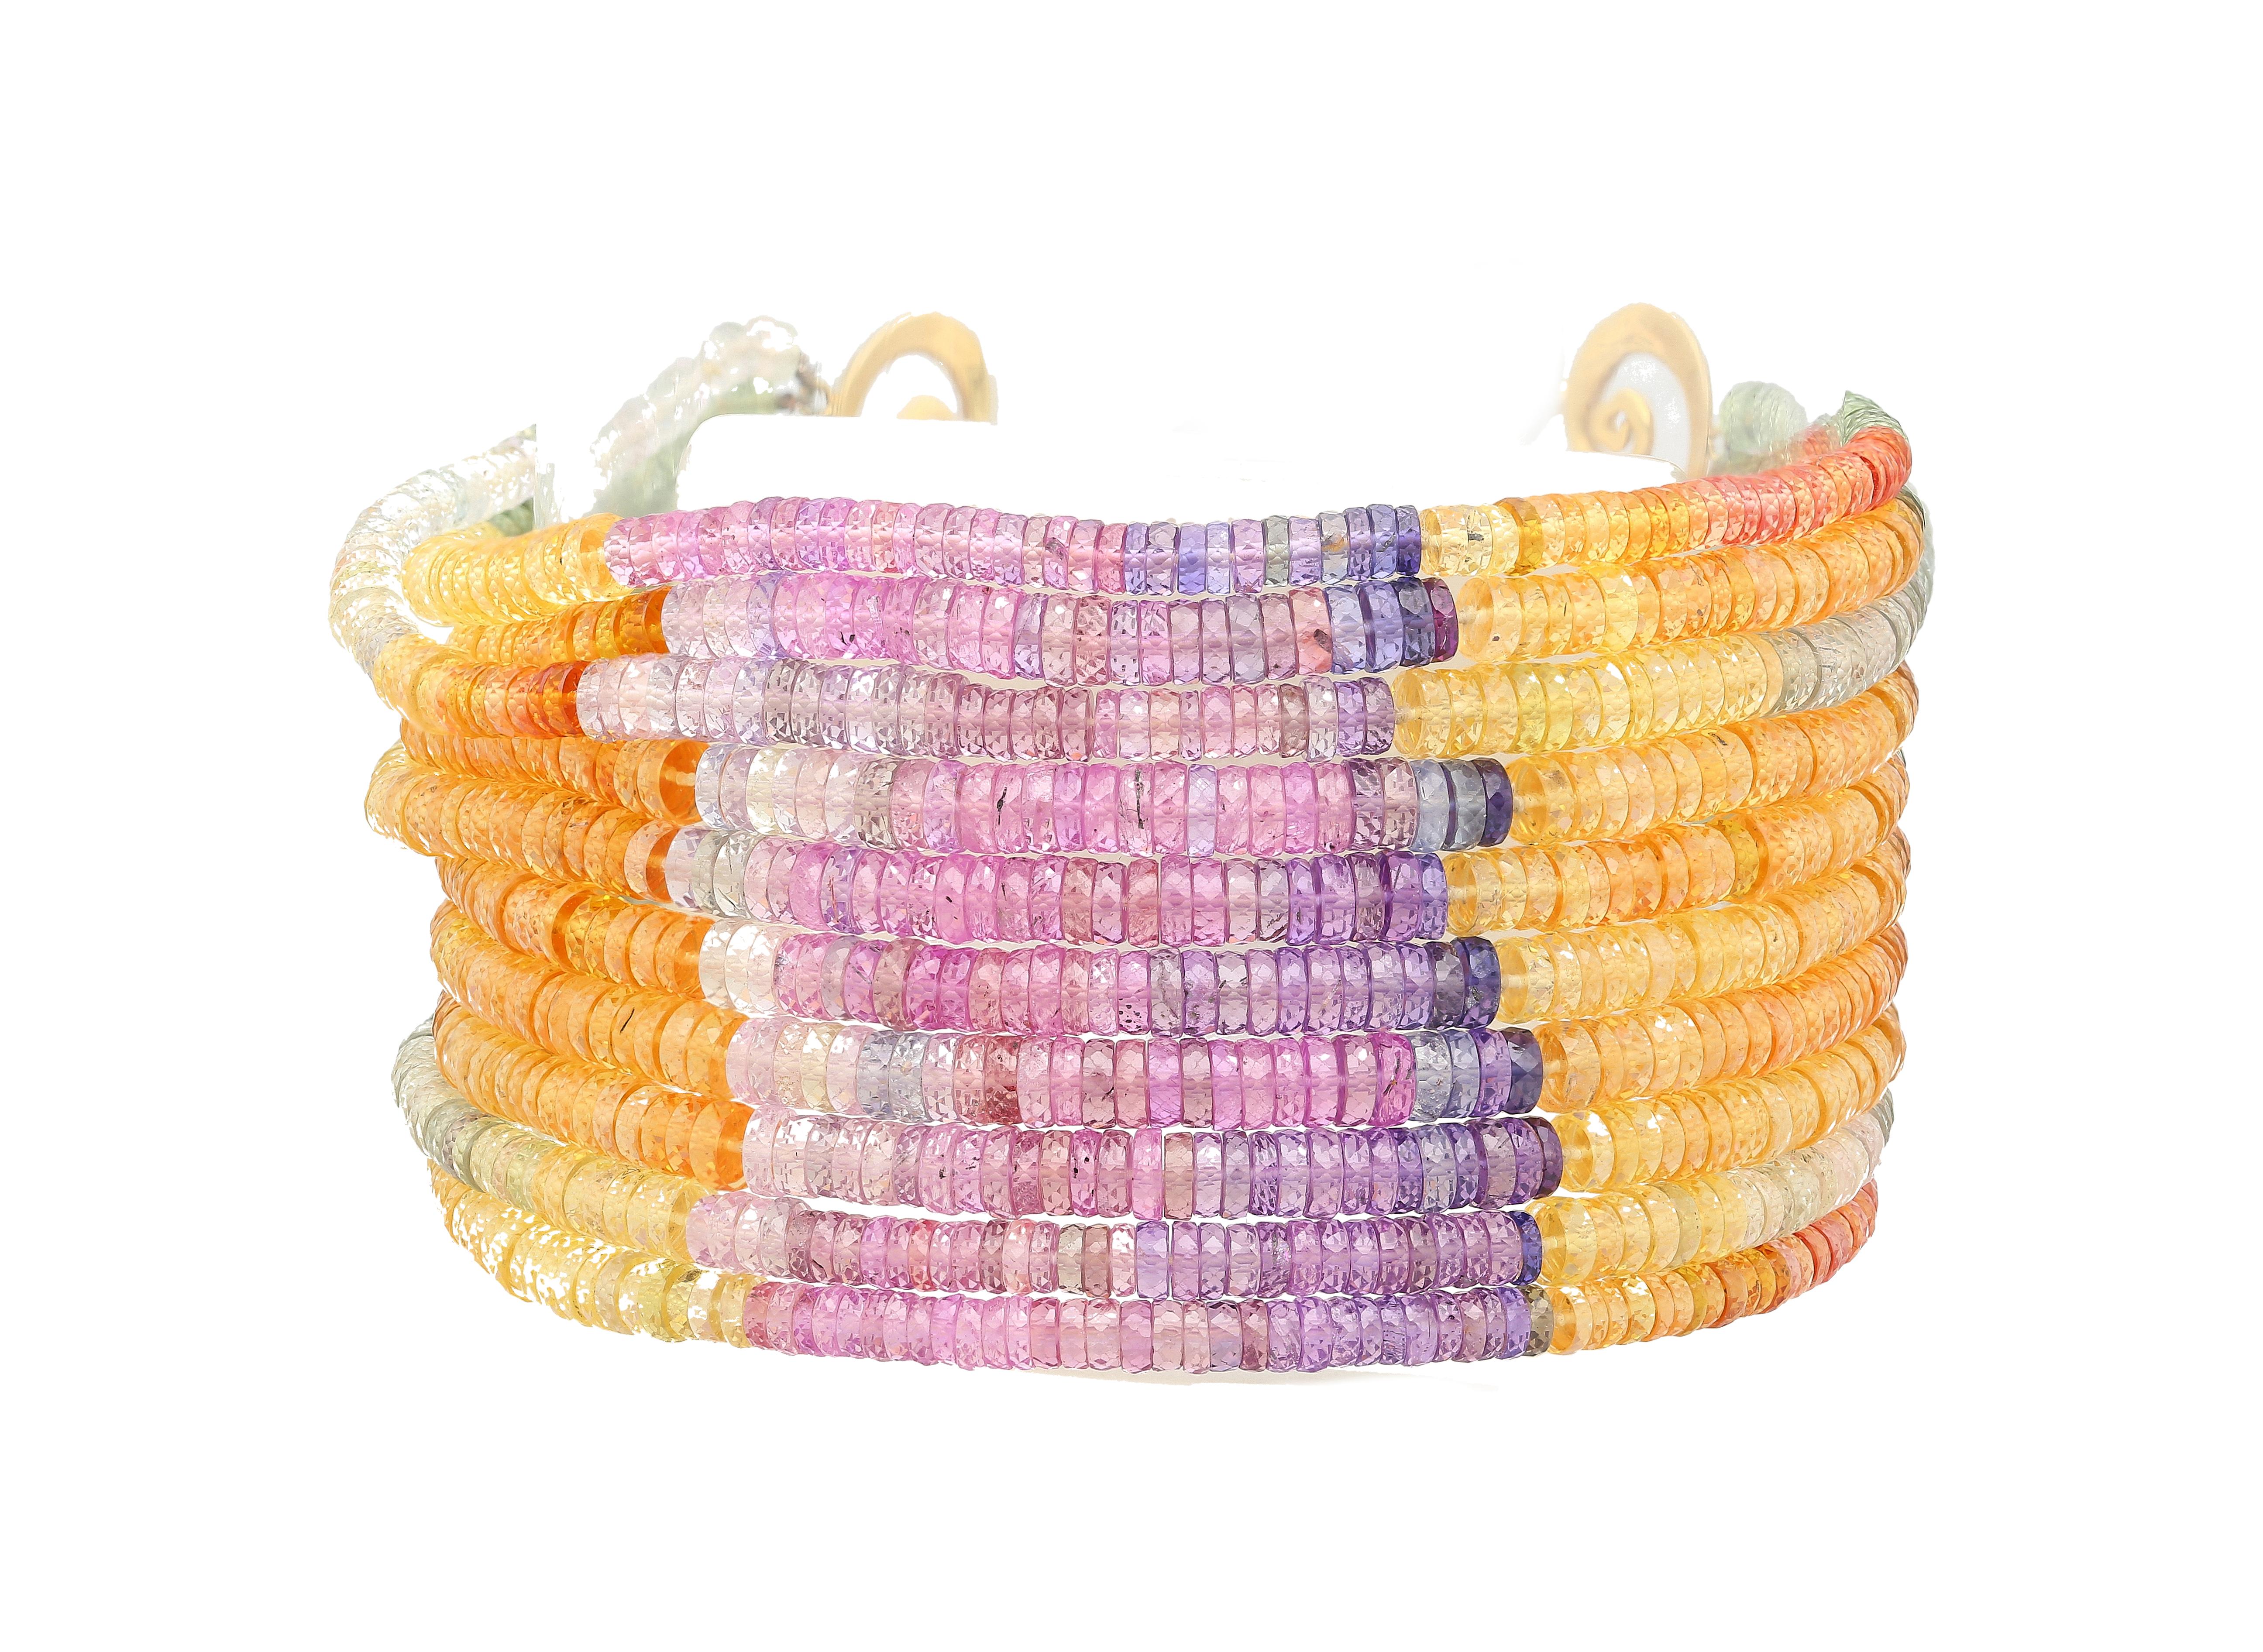 Multi-color Sapphire Bead and Diamond Bracelet in 18K Yellow Gold. A rainbow themed natural sapphire and diamond bracelet that hugs the wrist and dazzles with color.

This beaded bracelet features 10 strands of multi colored sapphires. Paired with